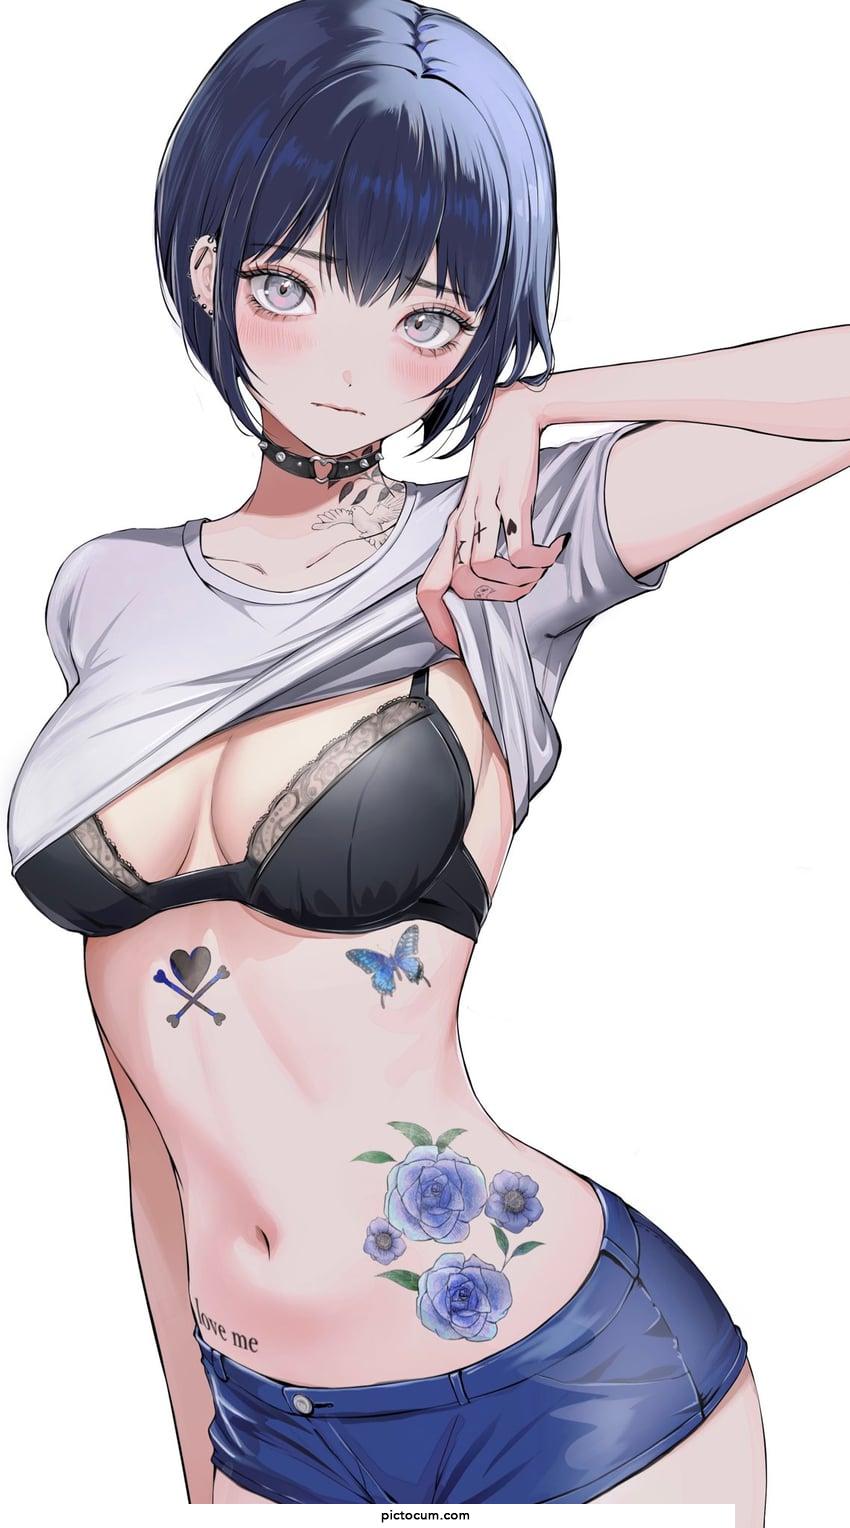 Showing Her Tattoos